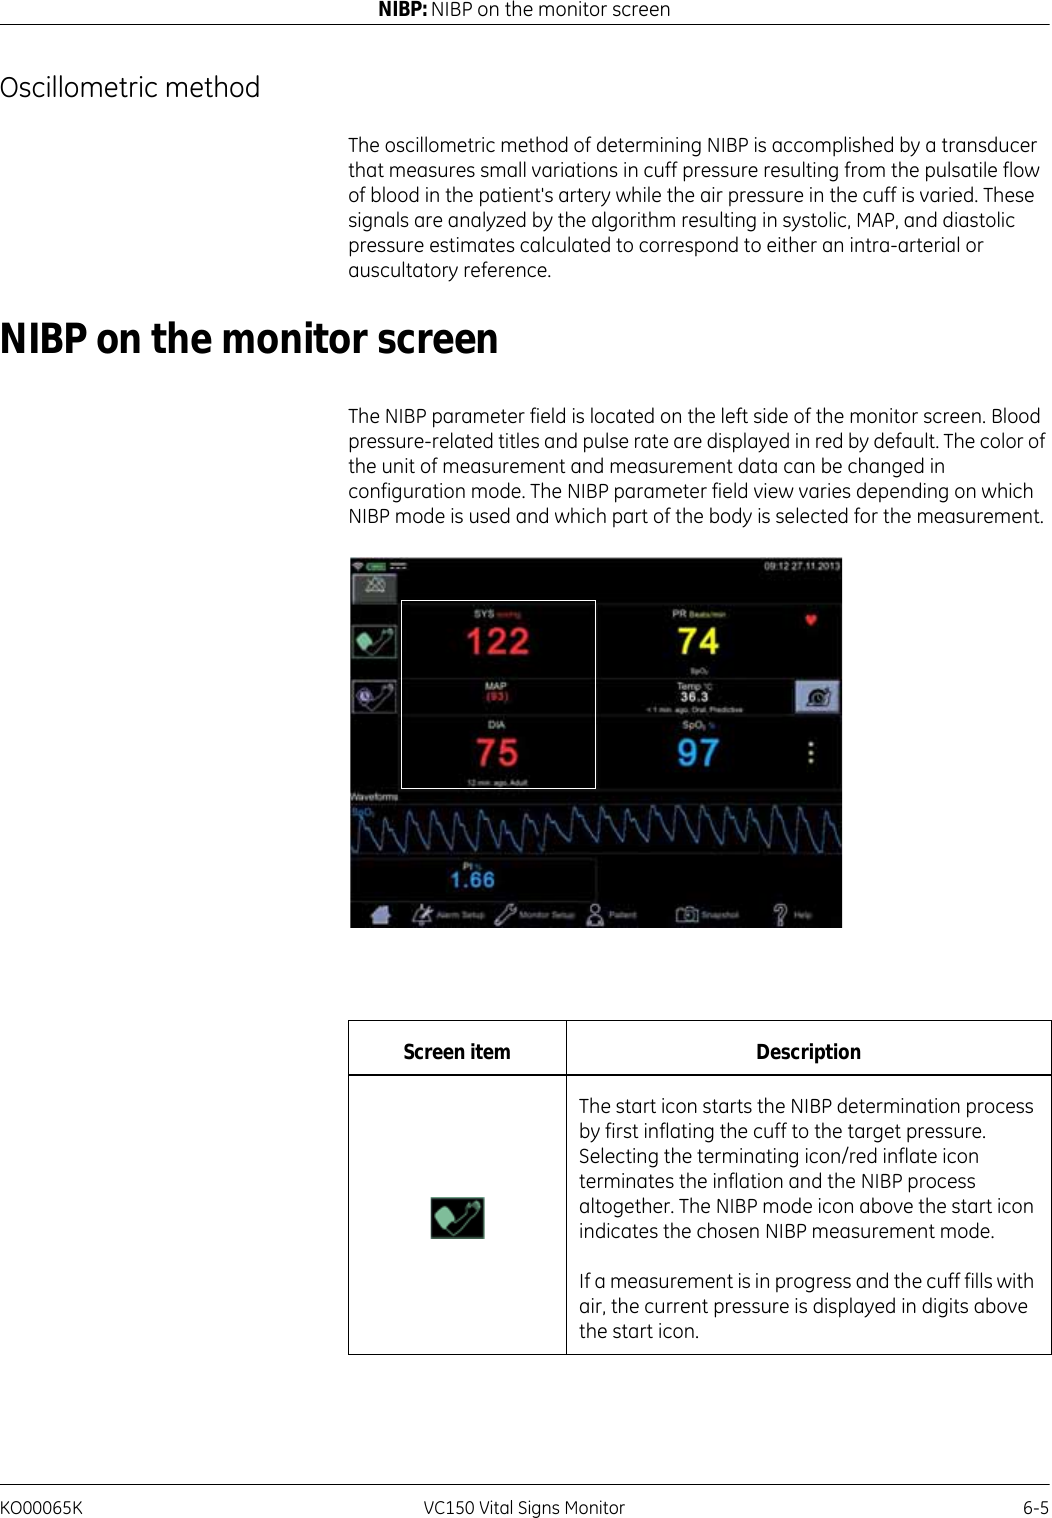 KO00065K VC150 Vital Signs Monitor 6-5NIBP: NIBP on the monitor screenOscillometric method The oscillometric method of determining NIBP is accomplished by a transducer that measures small variations in cuff pressure resulting from the pulsatile flow of blood in the patient&apos;s artery while the air pressure in the cuff is varied. These signals are analyzed by the algorithm resulting in systolic, MAP, and diastolic pressure estimates calculated to correspond to either an intra-arterial or auscultatory reference.NIBP on the monitor screenThe NIBP parameter field is located on the left side of the monitor screen. Blood pressure-related titles and pulse rate are displayed in red by default. The color of the unit of measurement and measurement data can be changed in configuration mode. The NIBP parameter field view varies depending on which NIBP mode is used and which part of the body is selected for the measurement.Screen item DescriptionThe start icon starts the NIBP determination process by first inflating the cuff to the target pressure. Selecting the terminating icon/red inflate icon terminates the inflation and the NIBP process altogether. The NIBP mode icon above the start icon indicates the chosen NIBP measurement mode.If a measurement is in progress and the cuff fills with air, the current pressure is displayed in digits above the start icon.